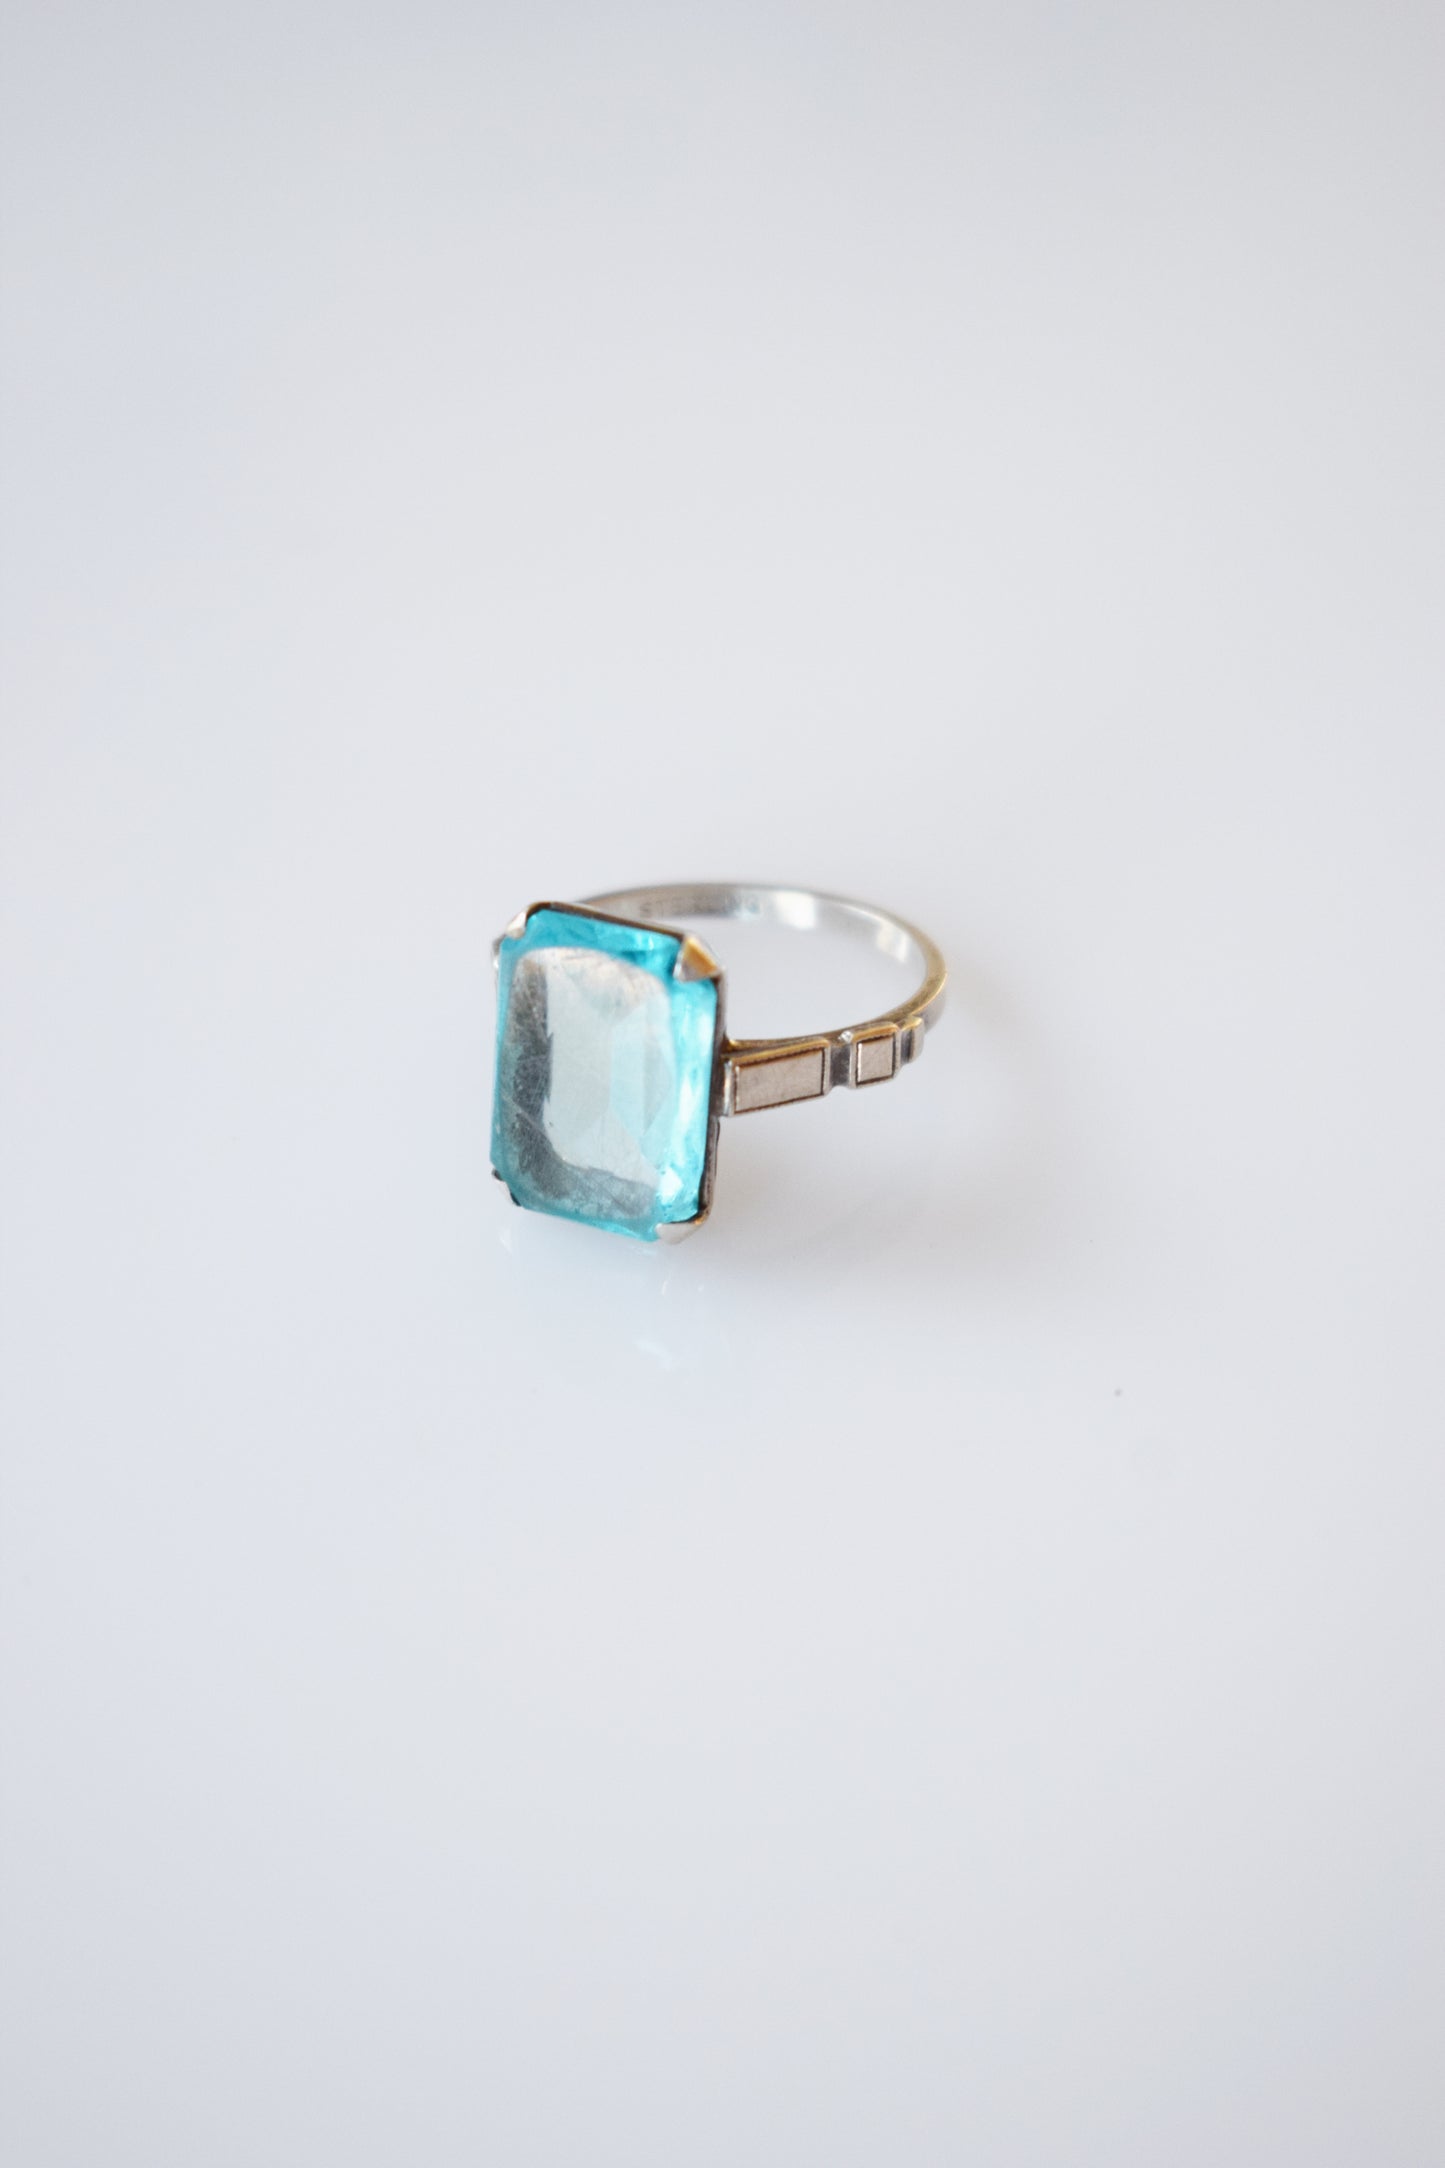 Vintage Art Deco Simulated Aquamarine and Silver Ring | 6.75